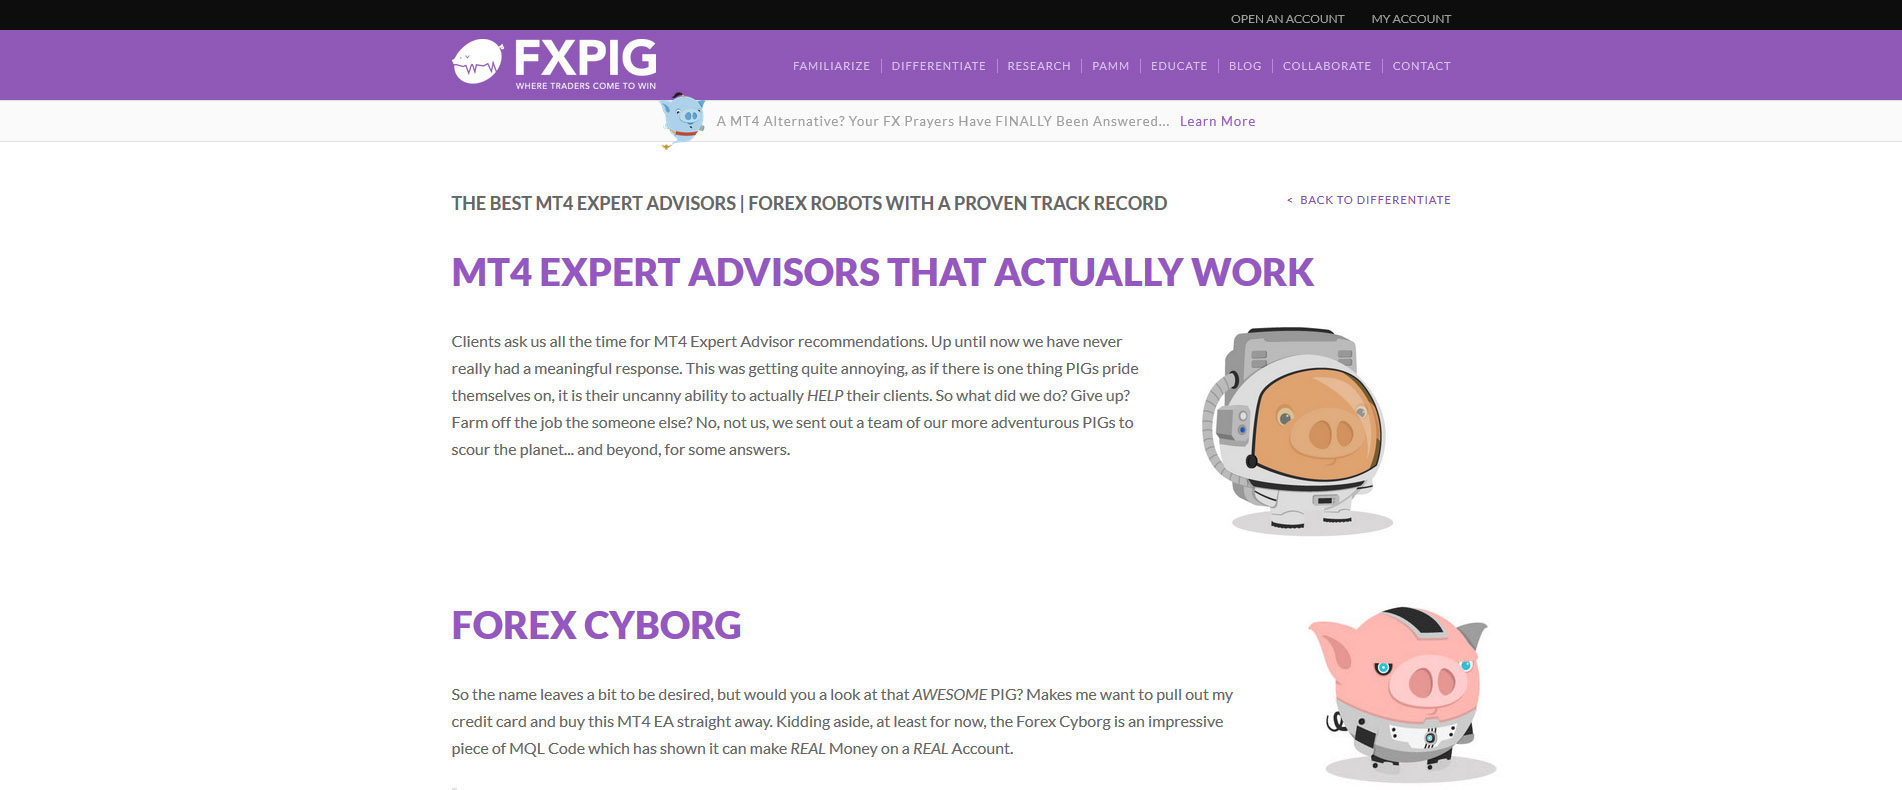 Forex Cyborg Recommended by FXPIG